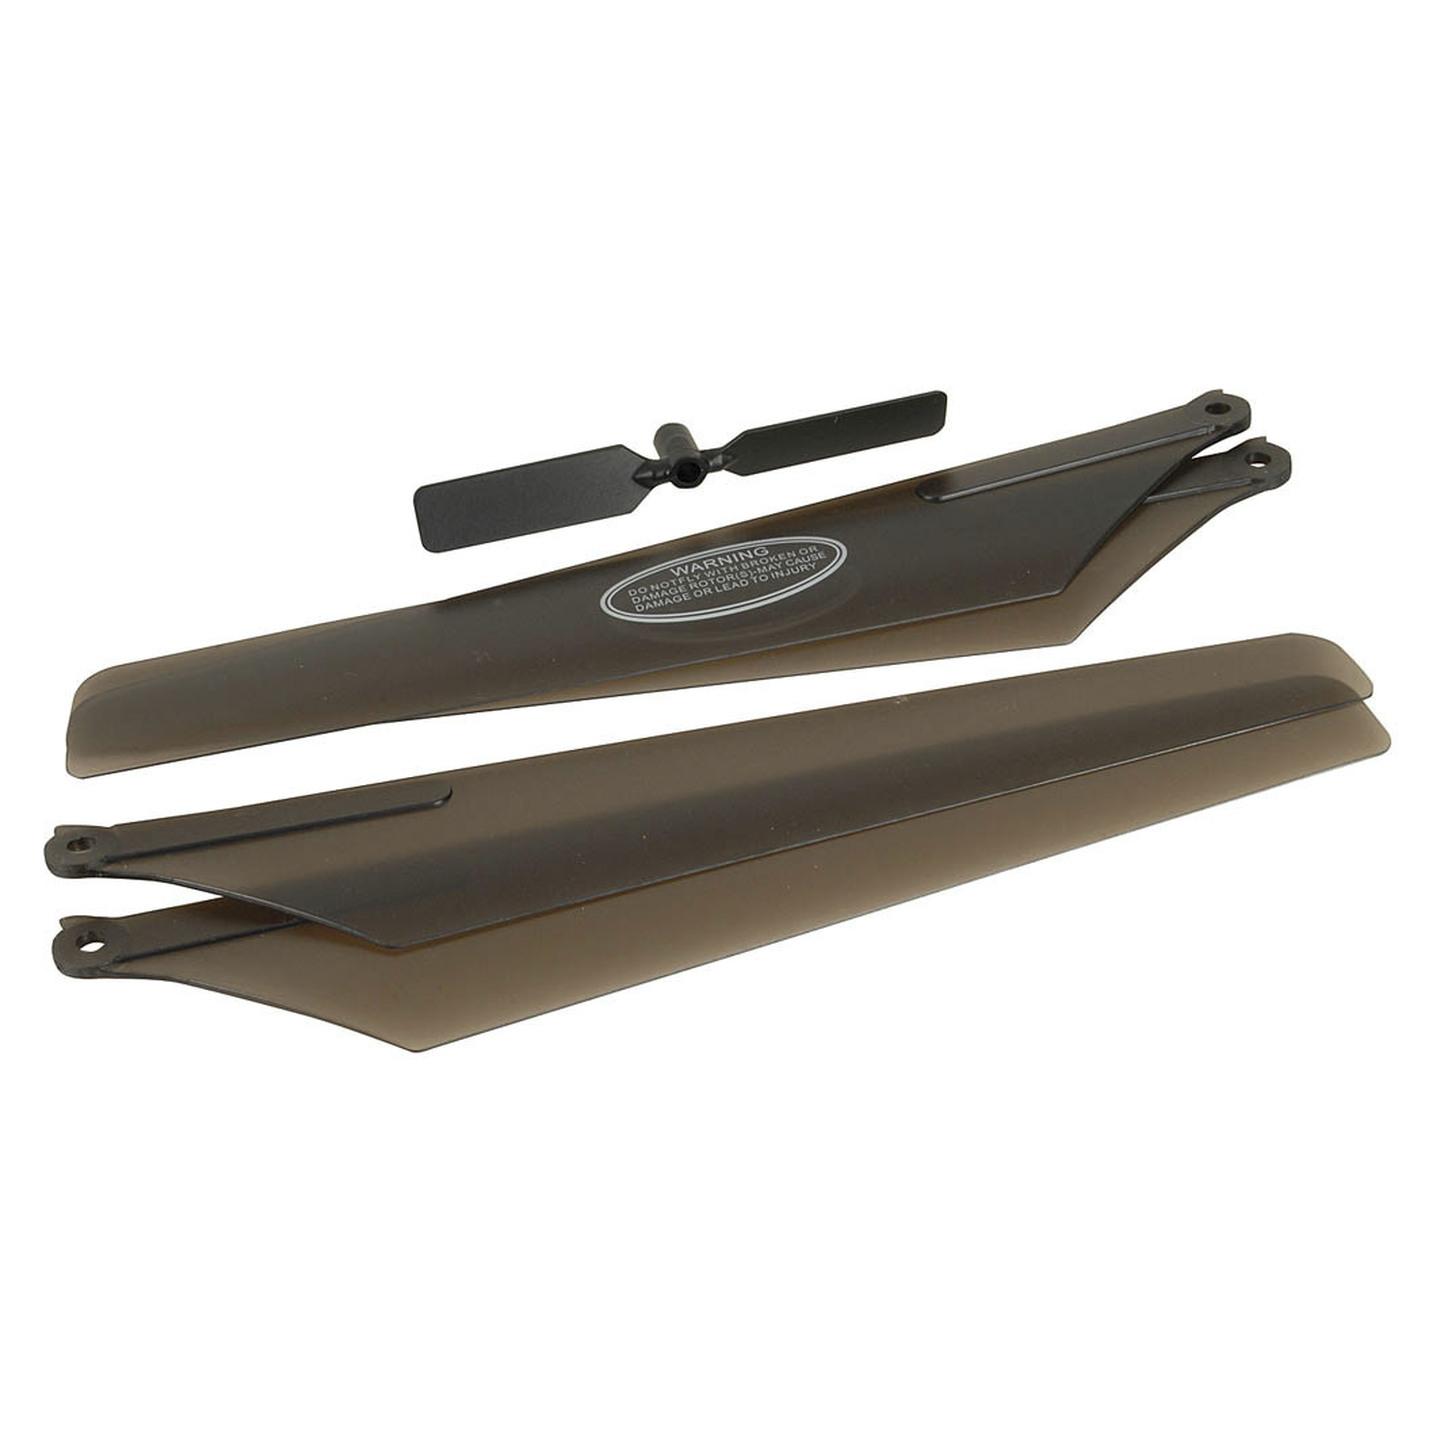 Main Rotor Blade and Tail Blade to suit GT-3360 Helicopter